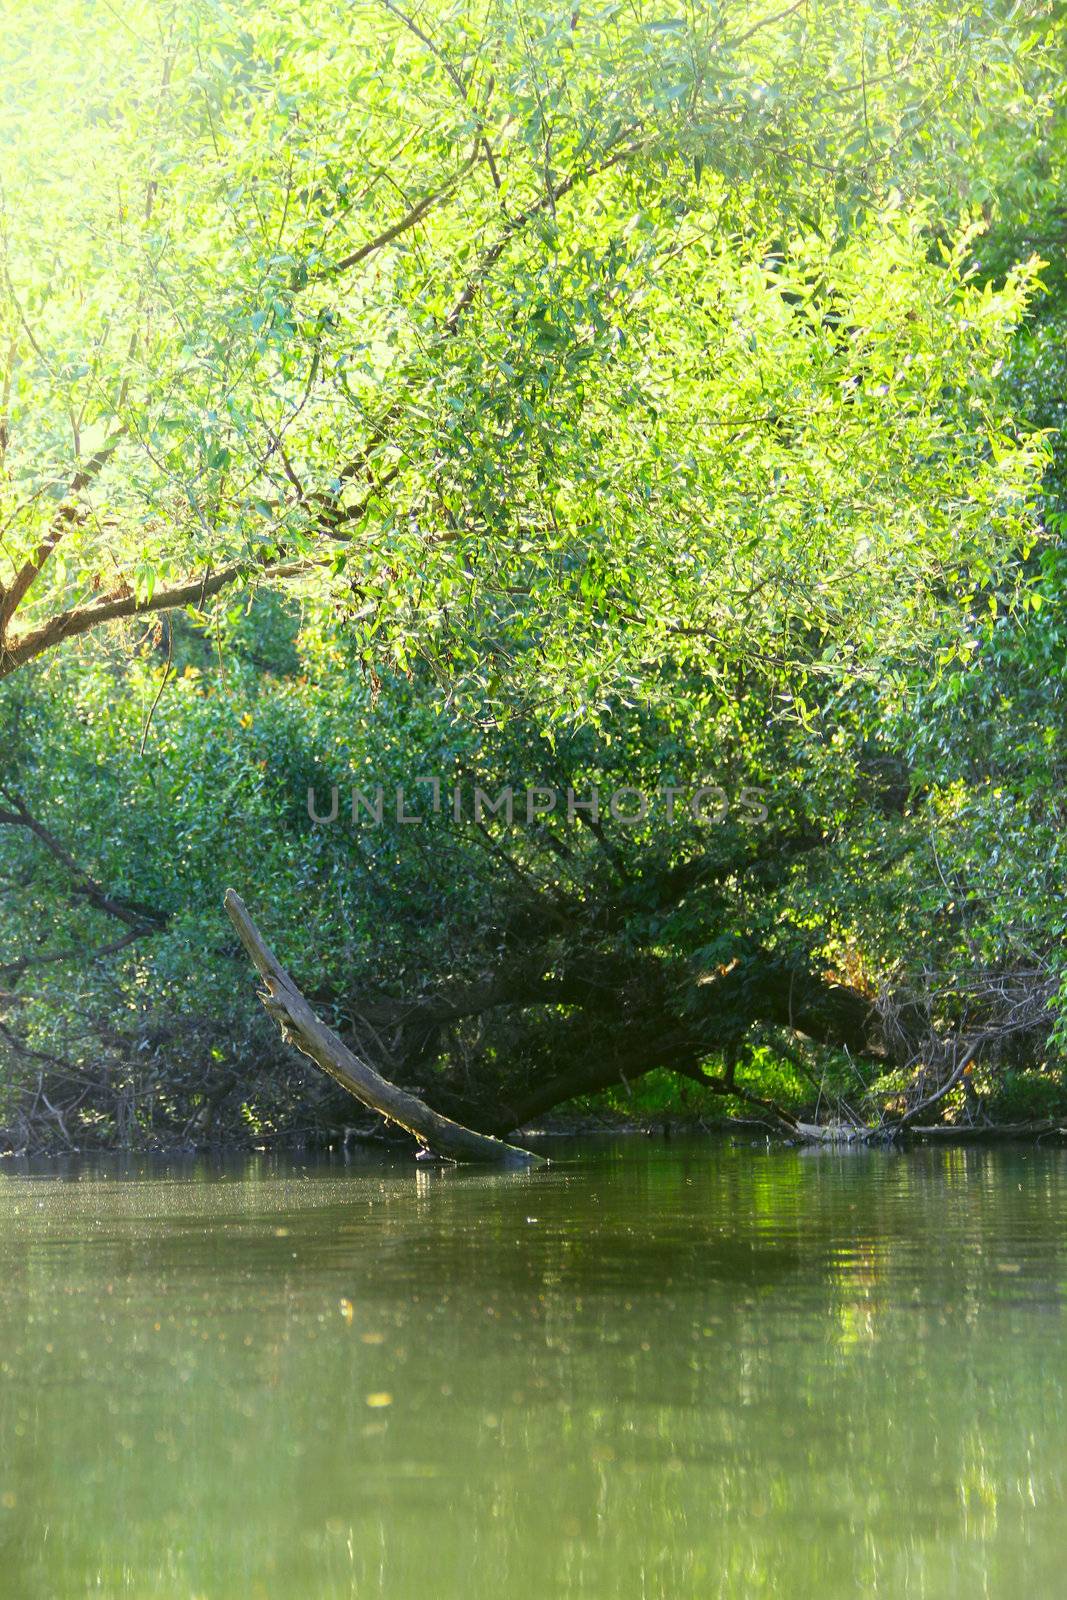 Forest river scene with trees over the water